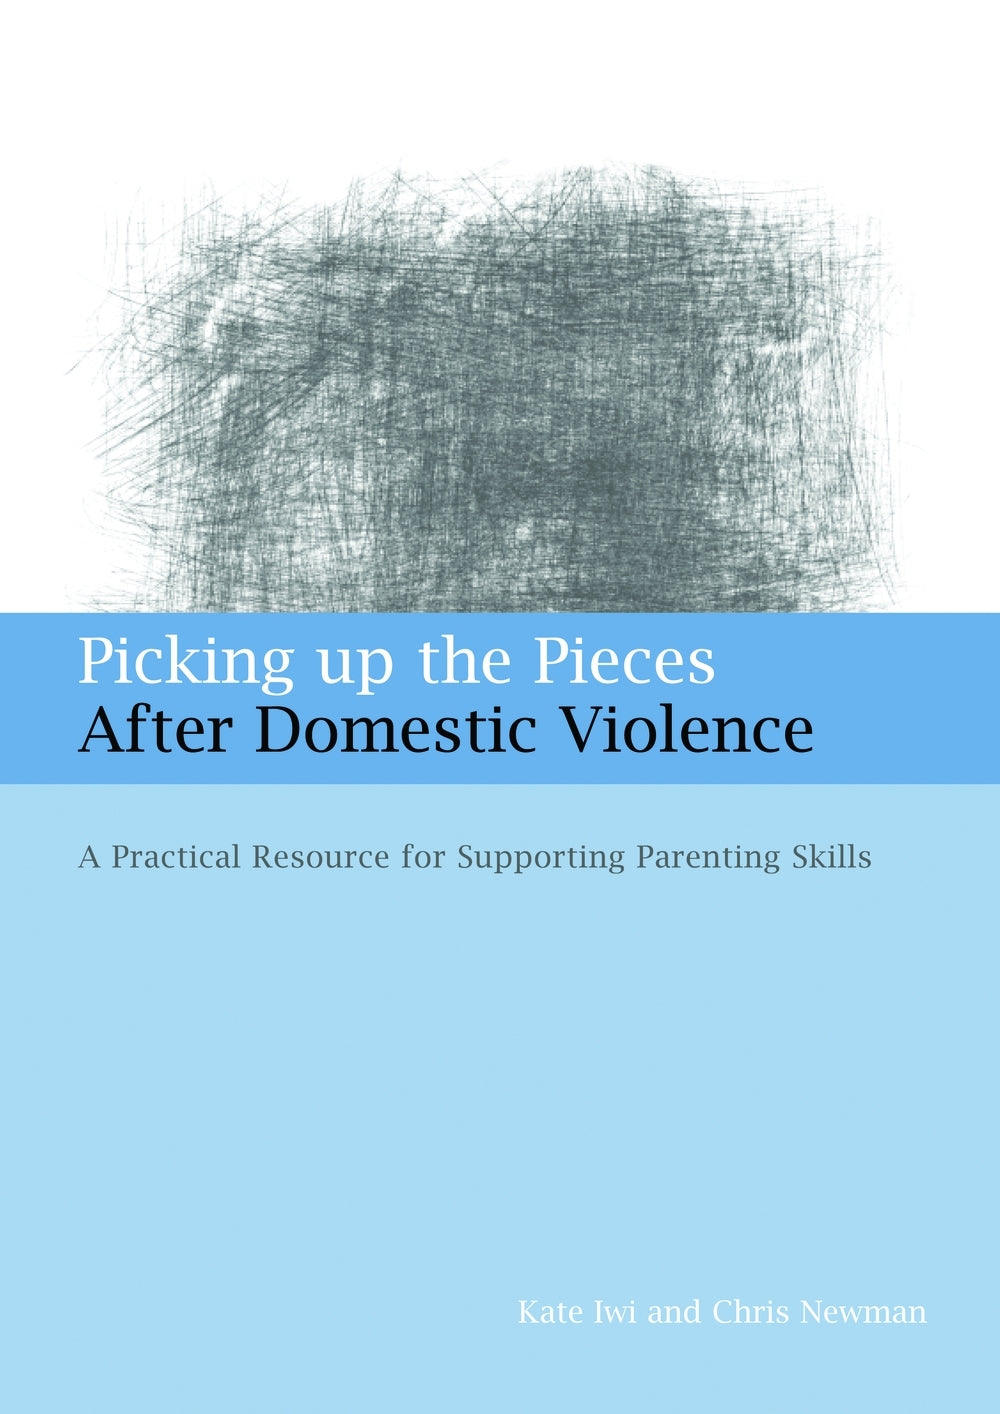 Picking up the Pieces After Domestic Violence by Kate Iwi, Chris Newman